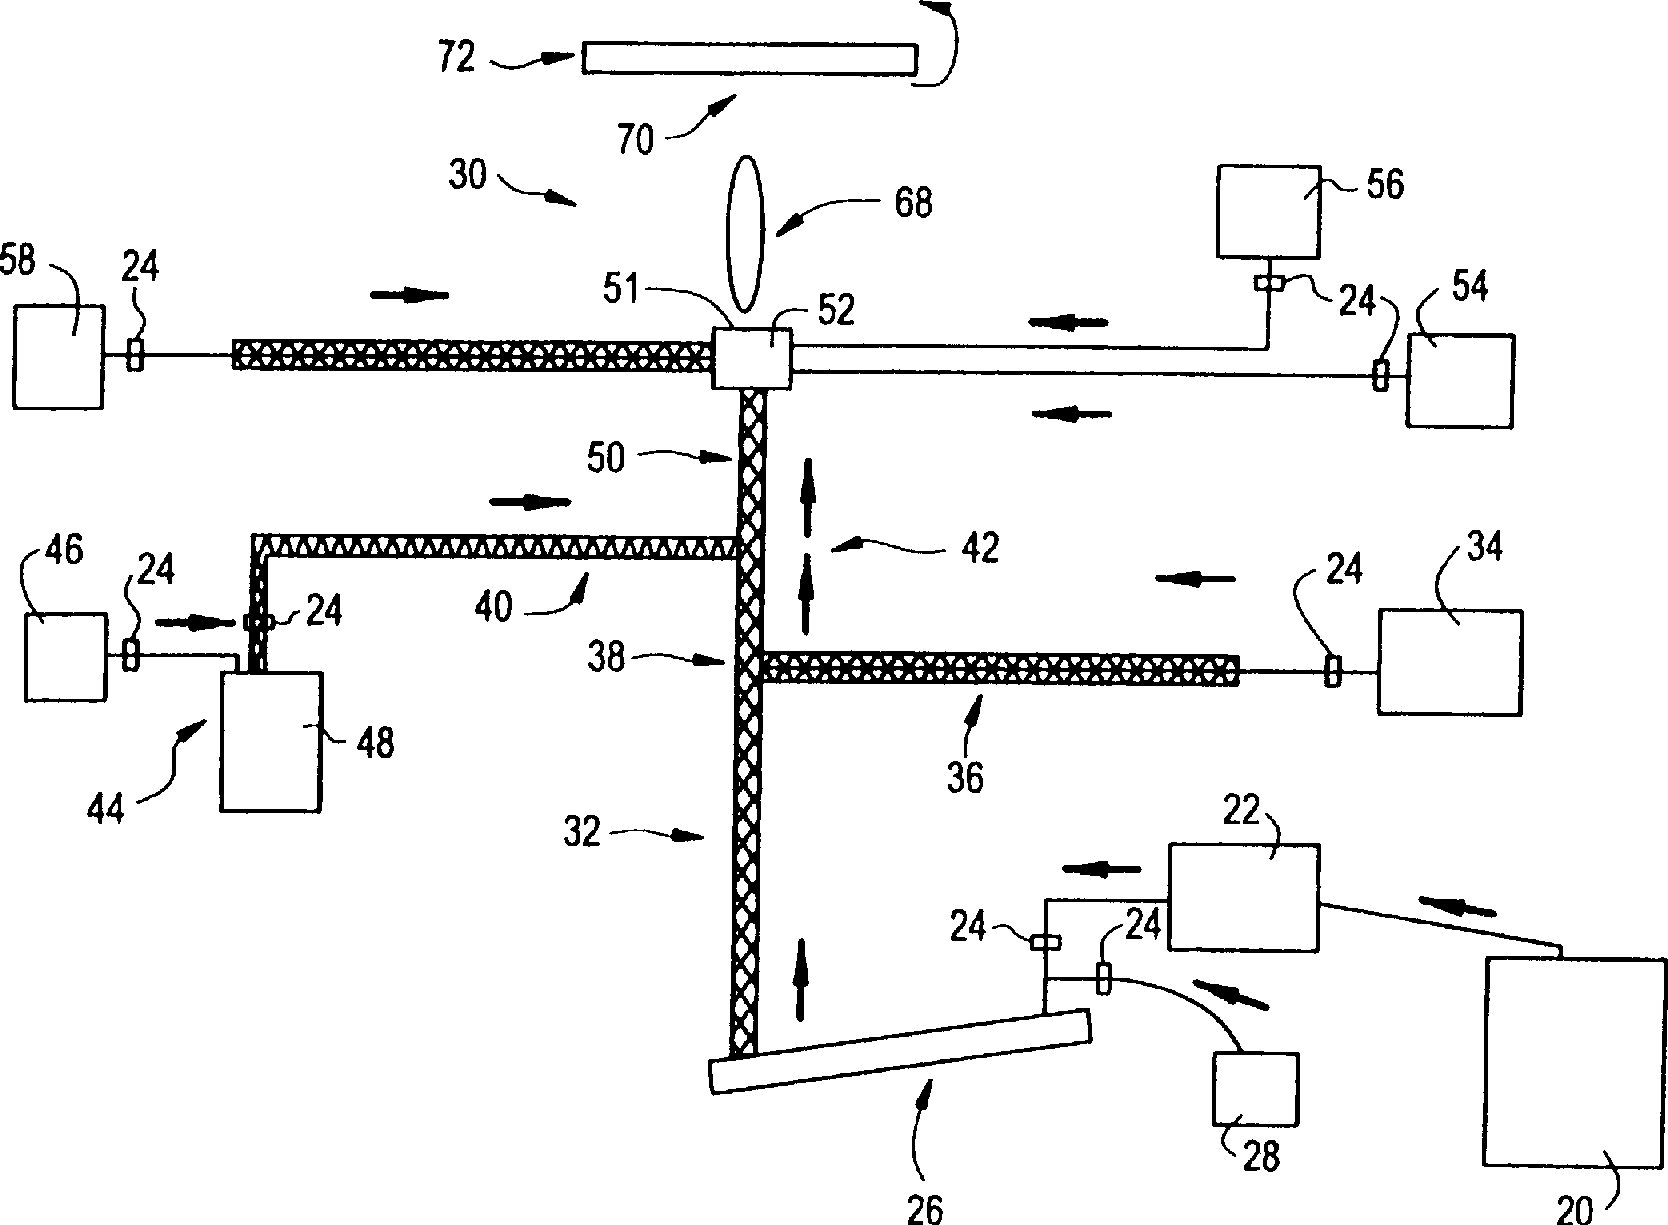 Germanium chloride and siloxane feedstock for forming silica glass and method